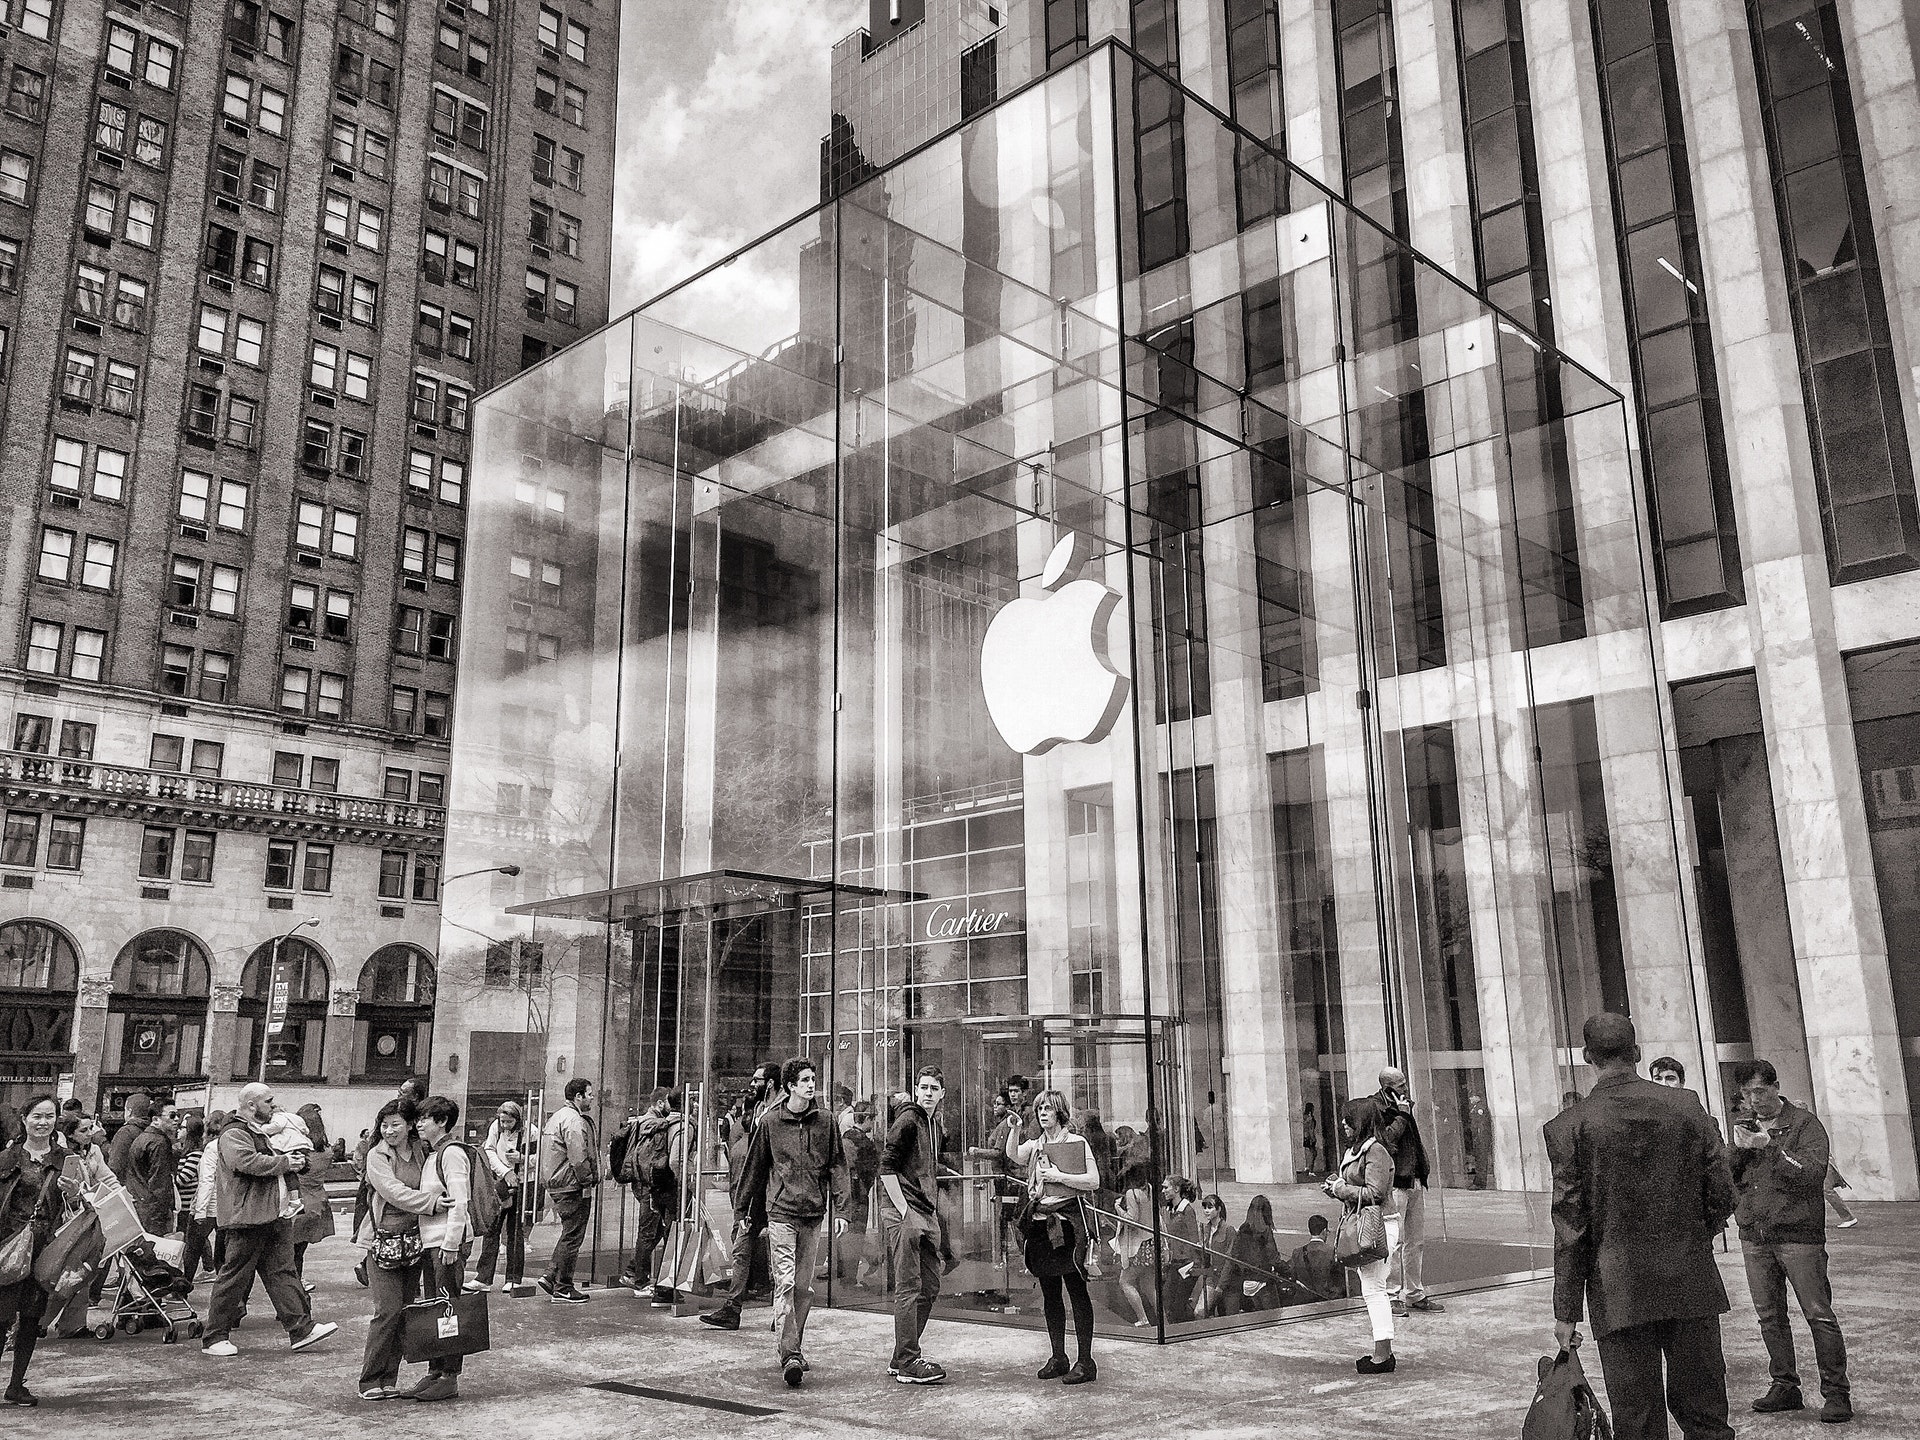 Top 5 Lessons I Learned Working at Apple Retail in the Early 2000s (Plus a tale from retail)